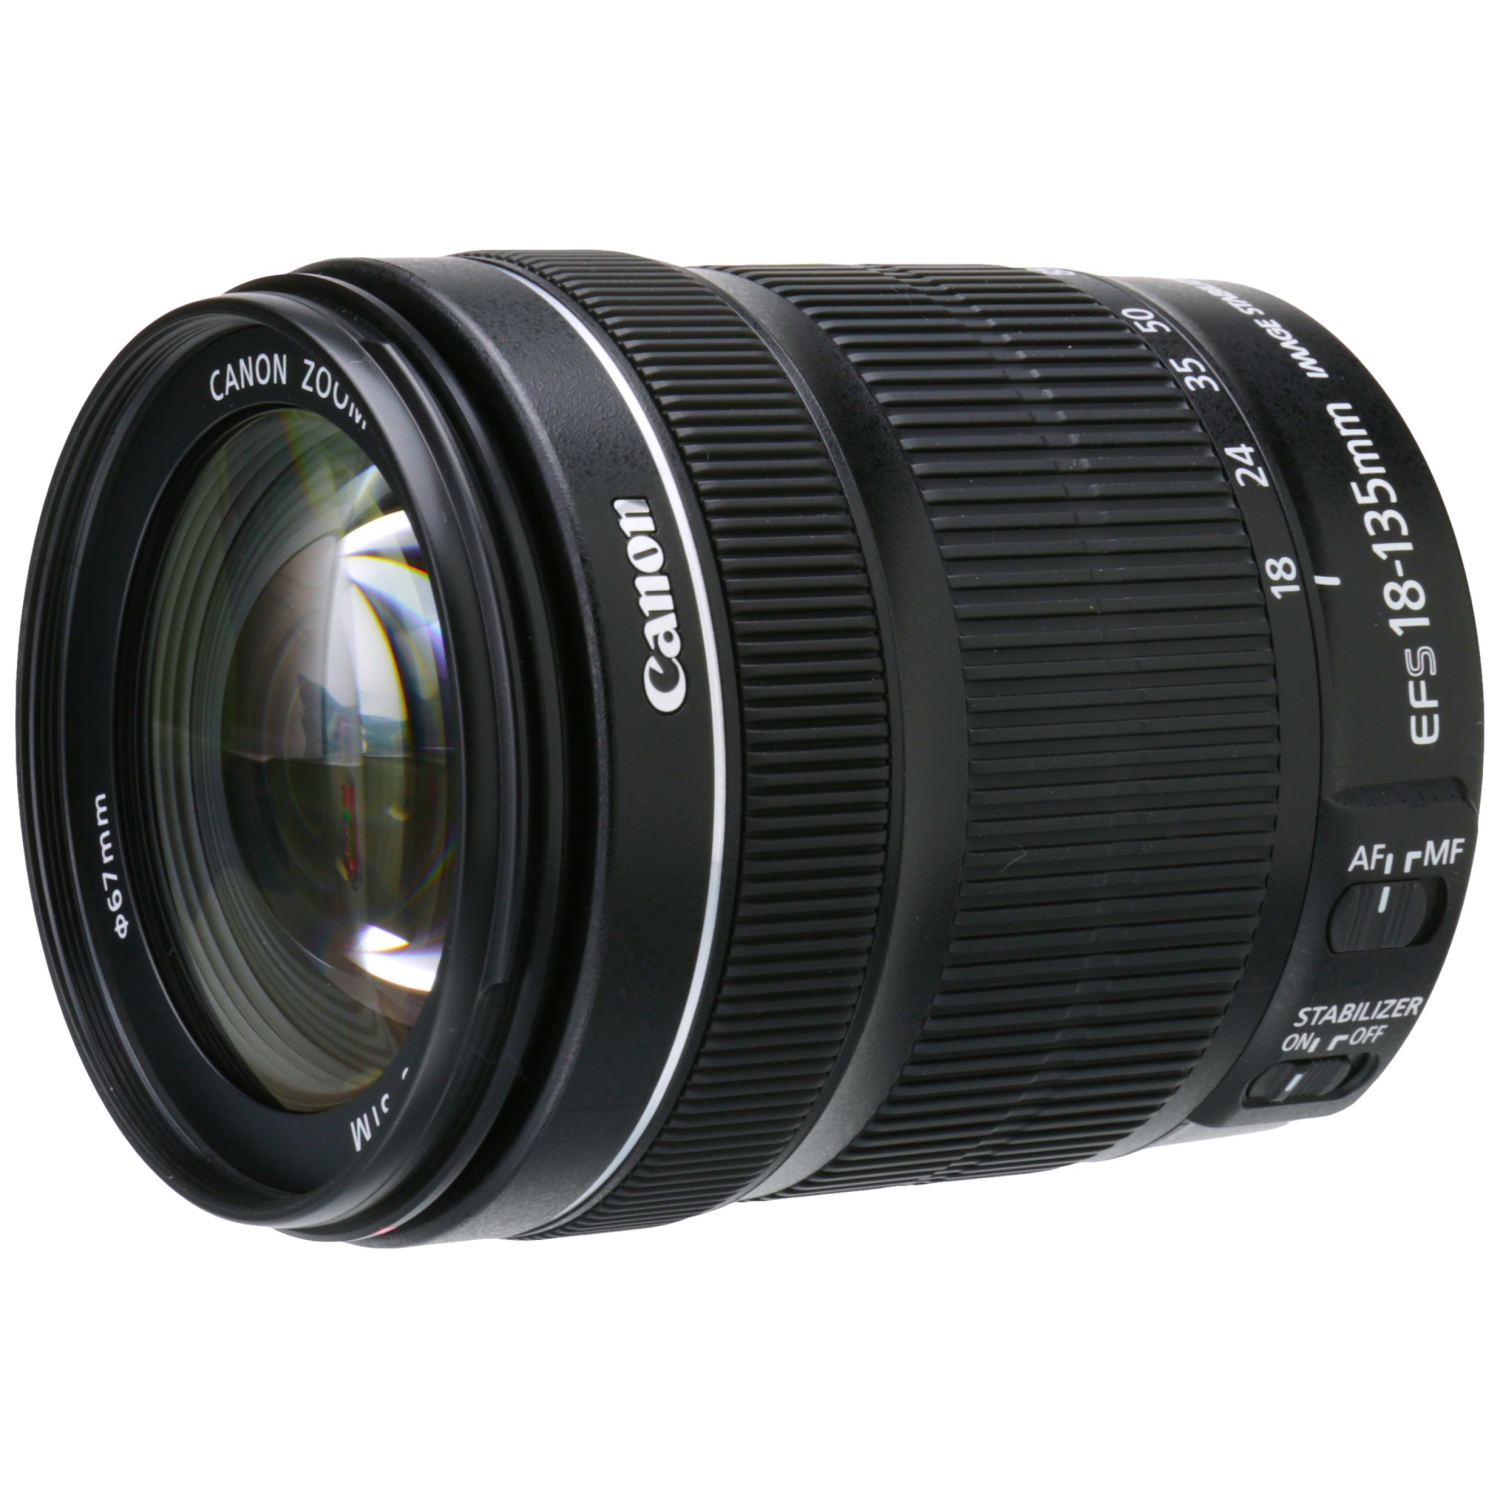 Canon 18-135mm f3.5-5.6 IS EFS STM Lens | Best Buy Canada